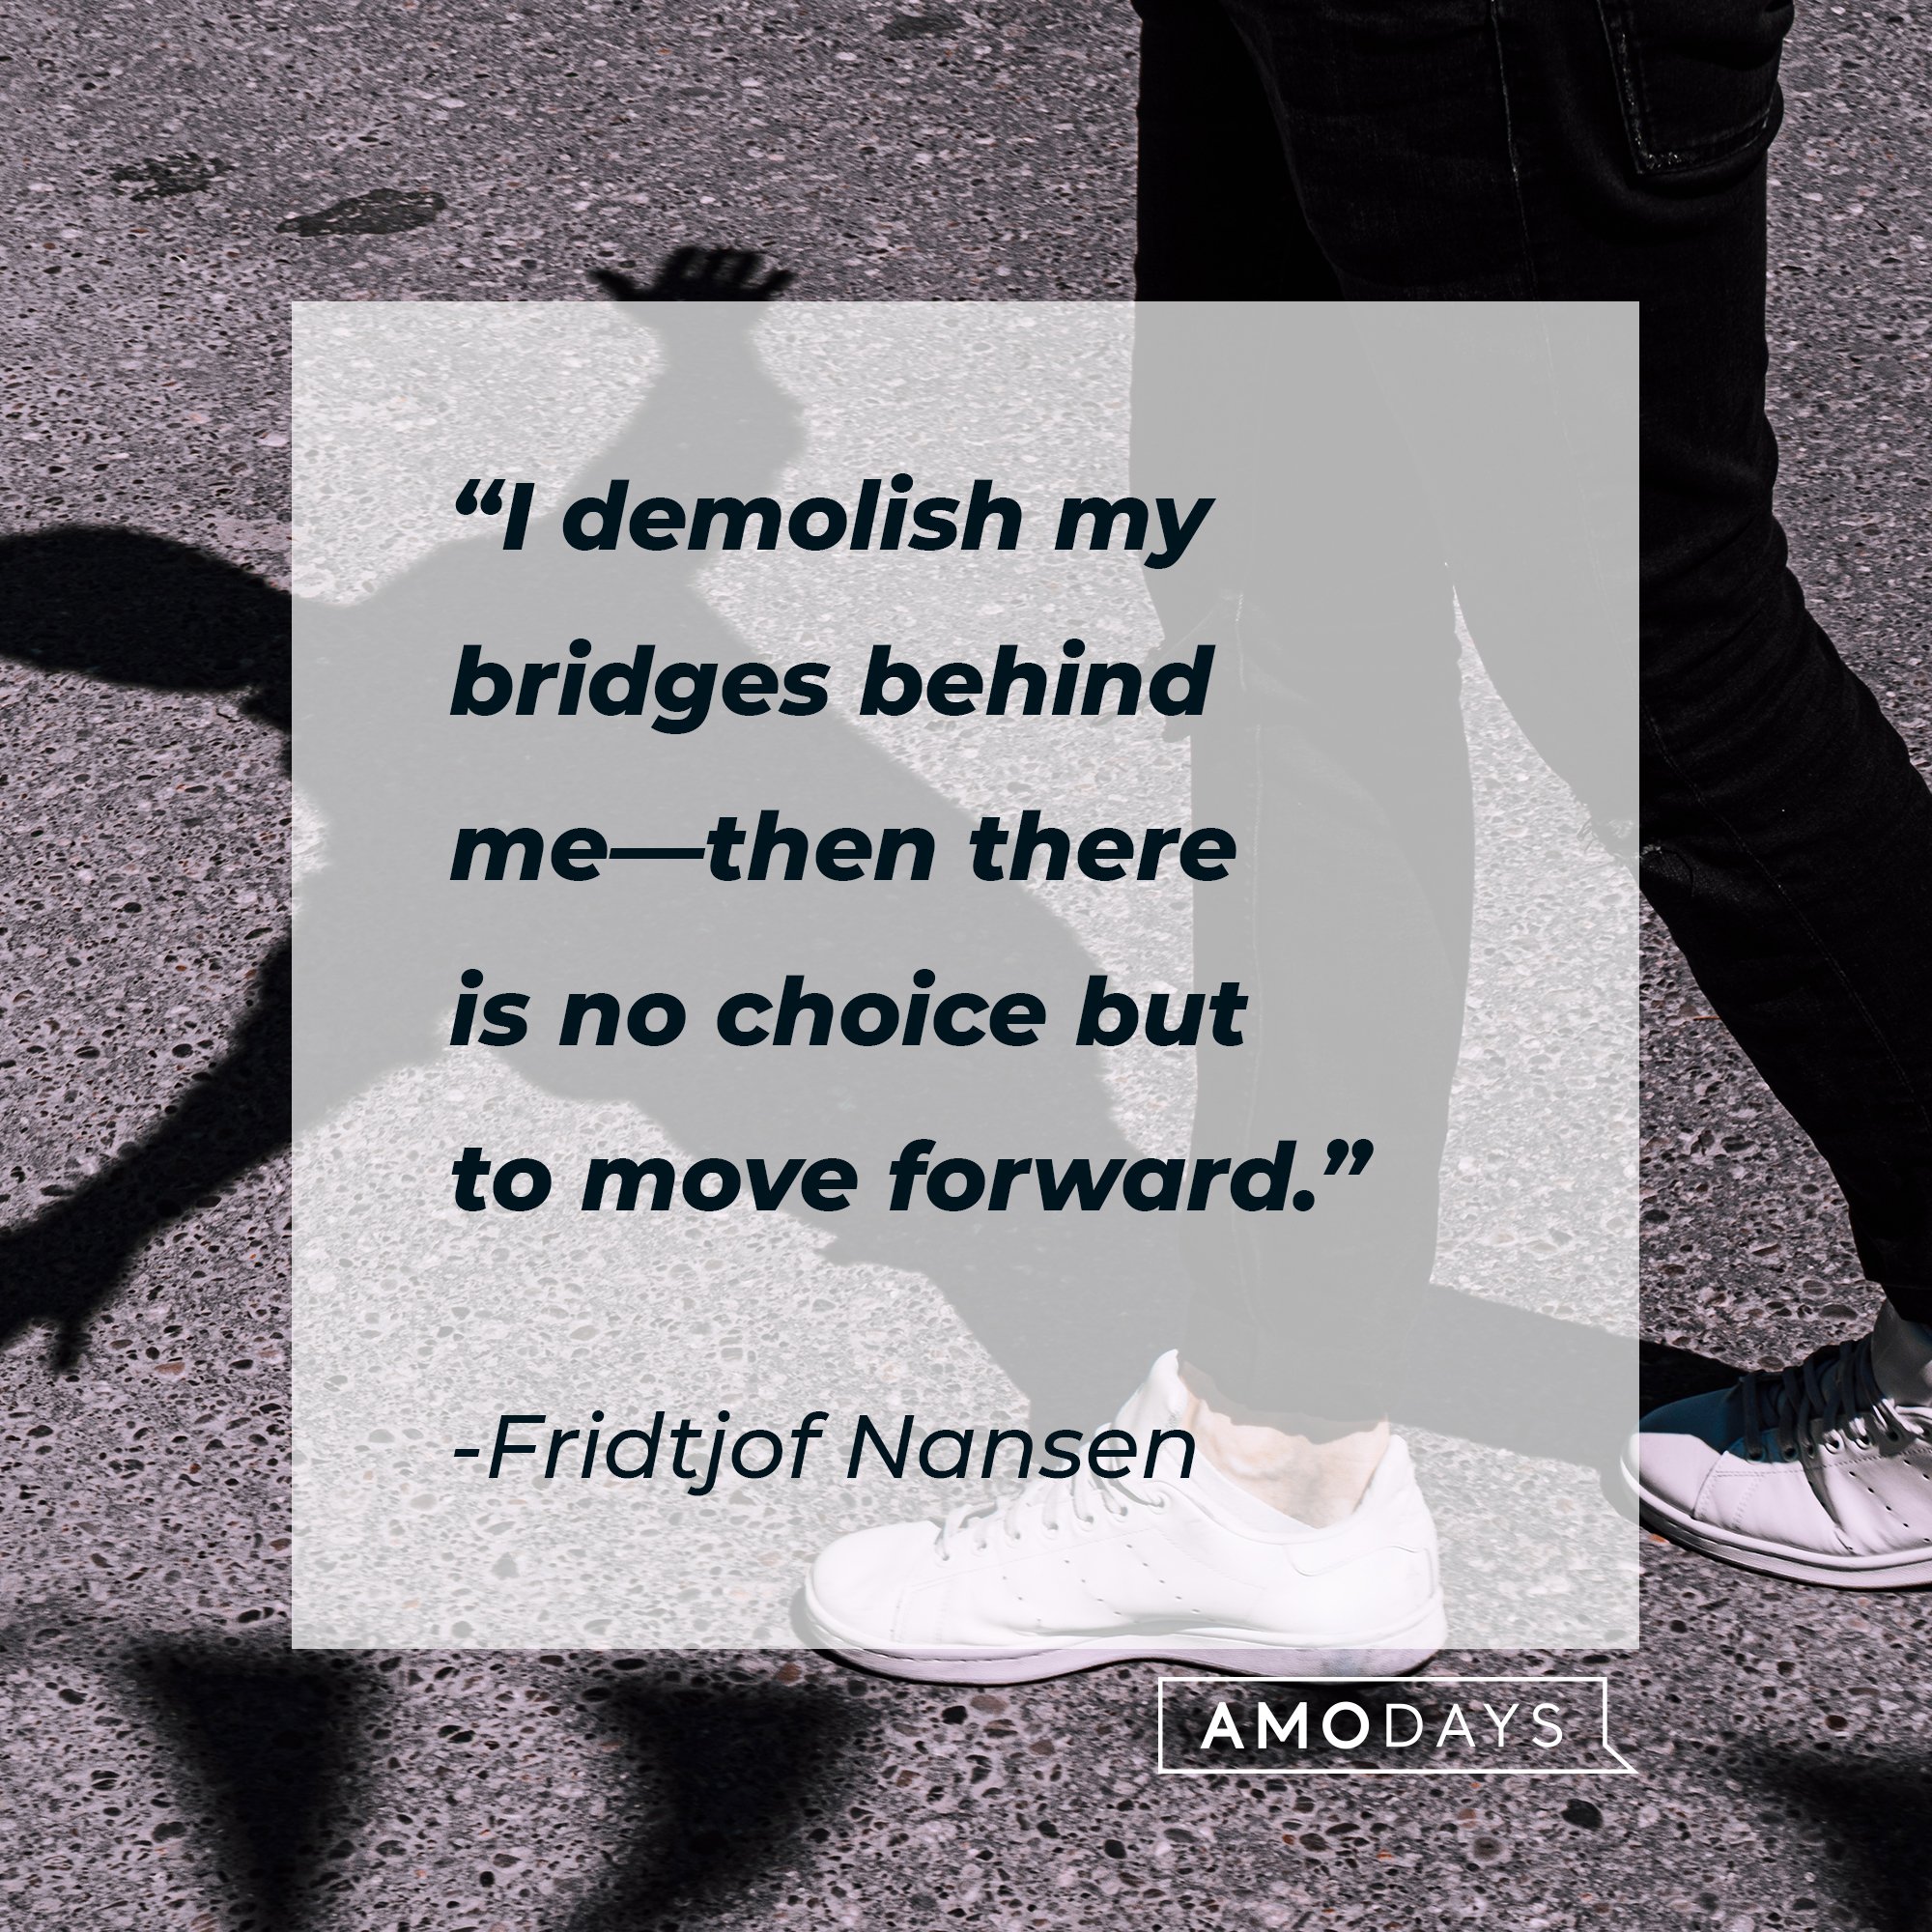  Fridtjof Nansen’s quote: "I demolish my bridges behind me―then there is no choice but to move forward." | Image: AmoDays